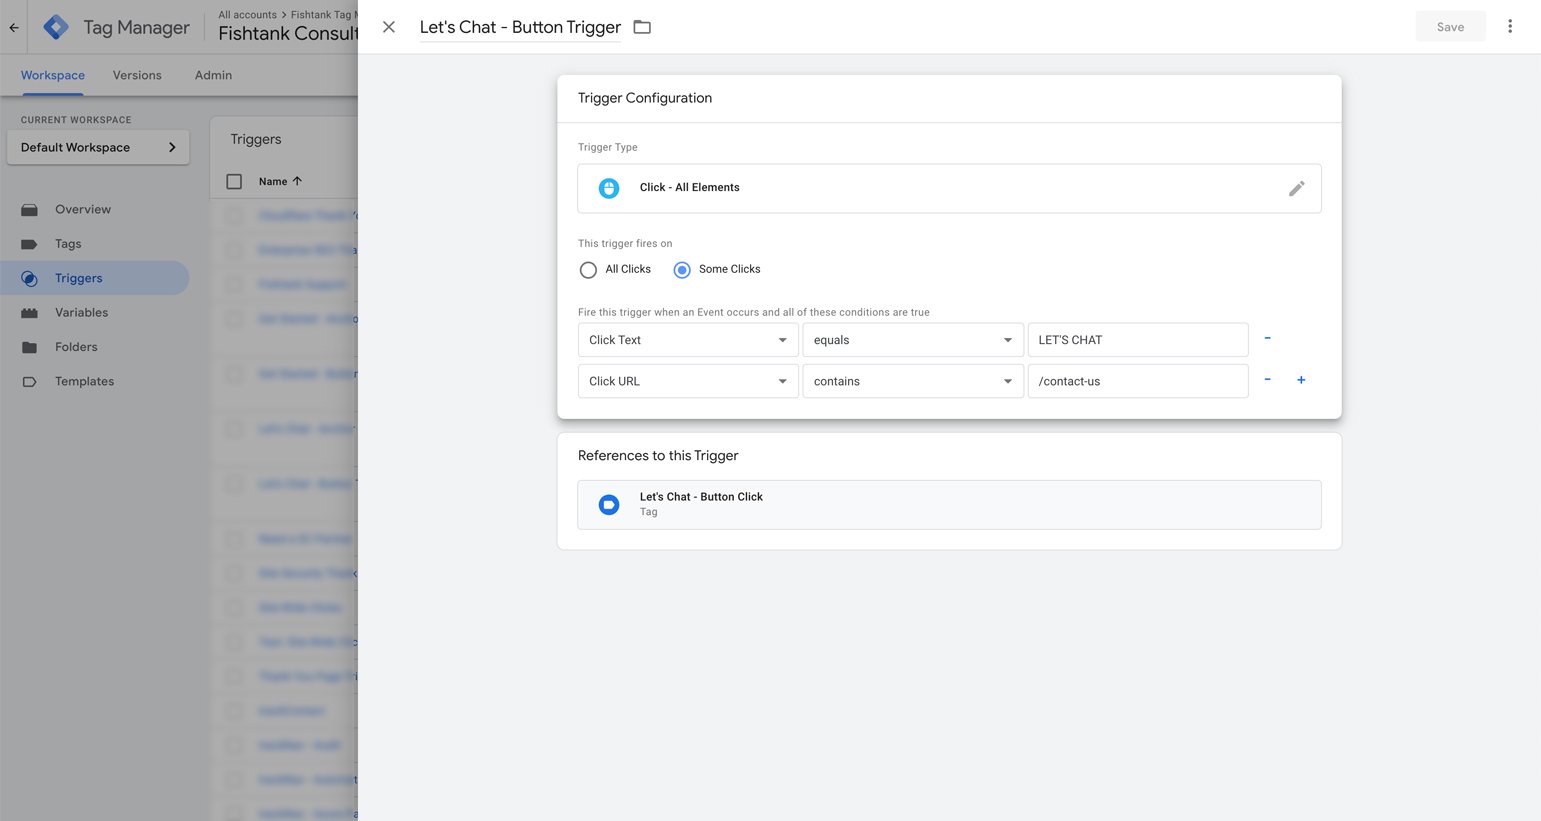 Configuring a trigger in Google Tag Manager for a button click